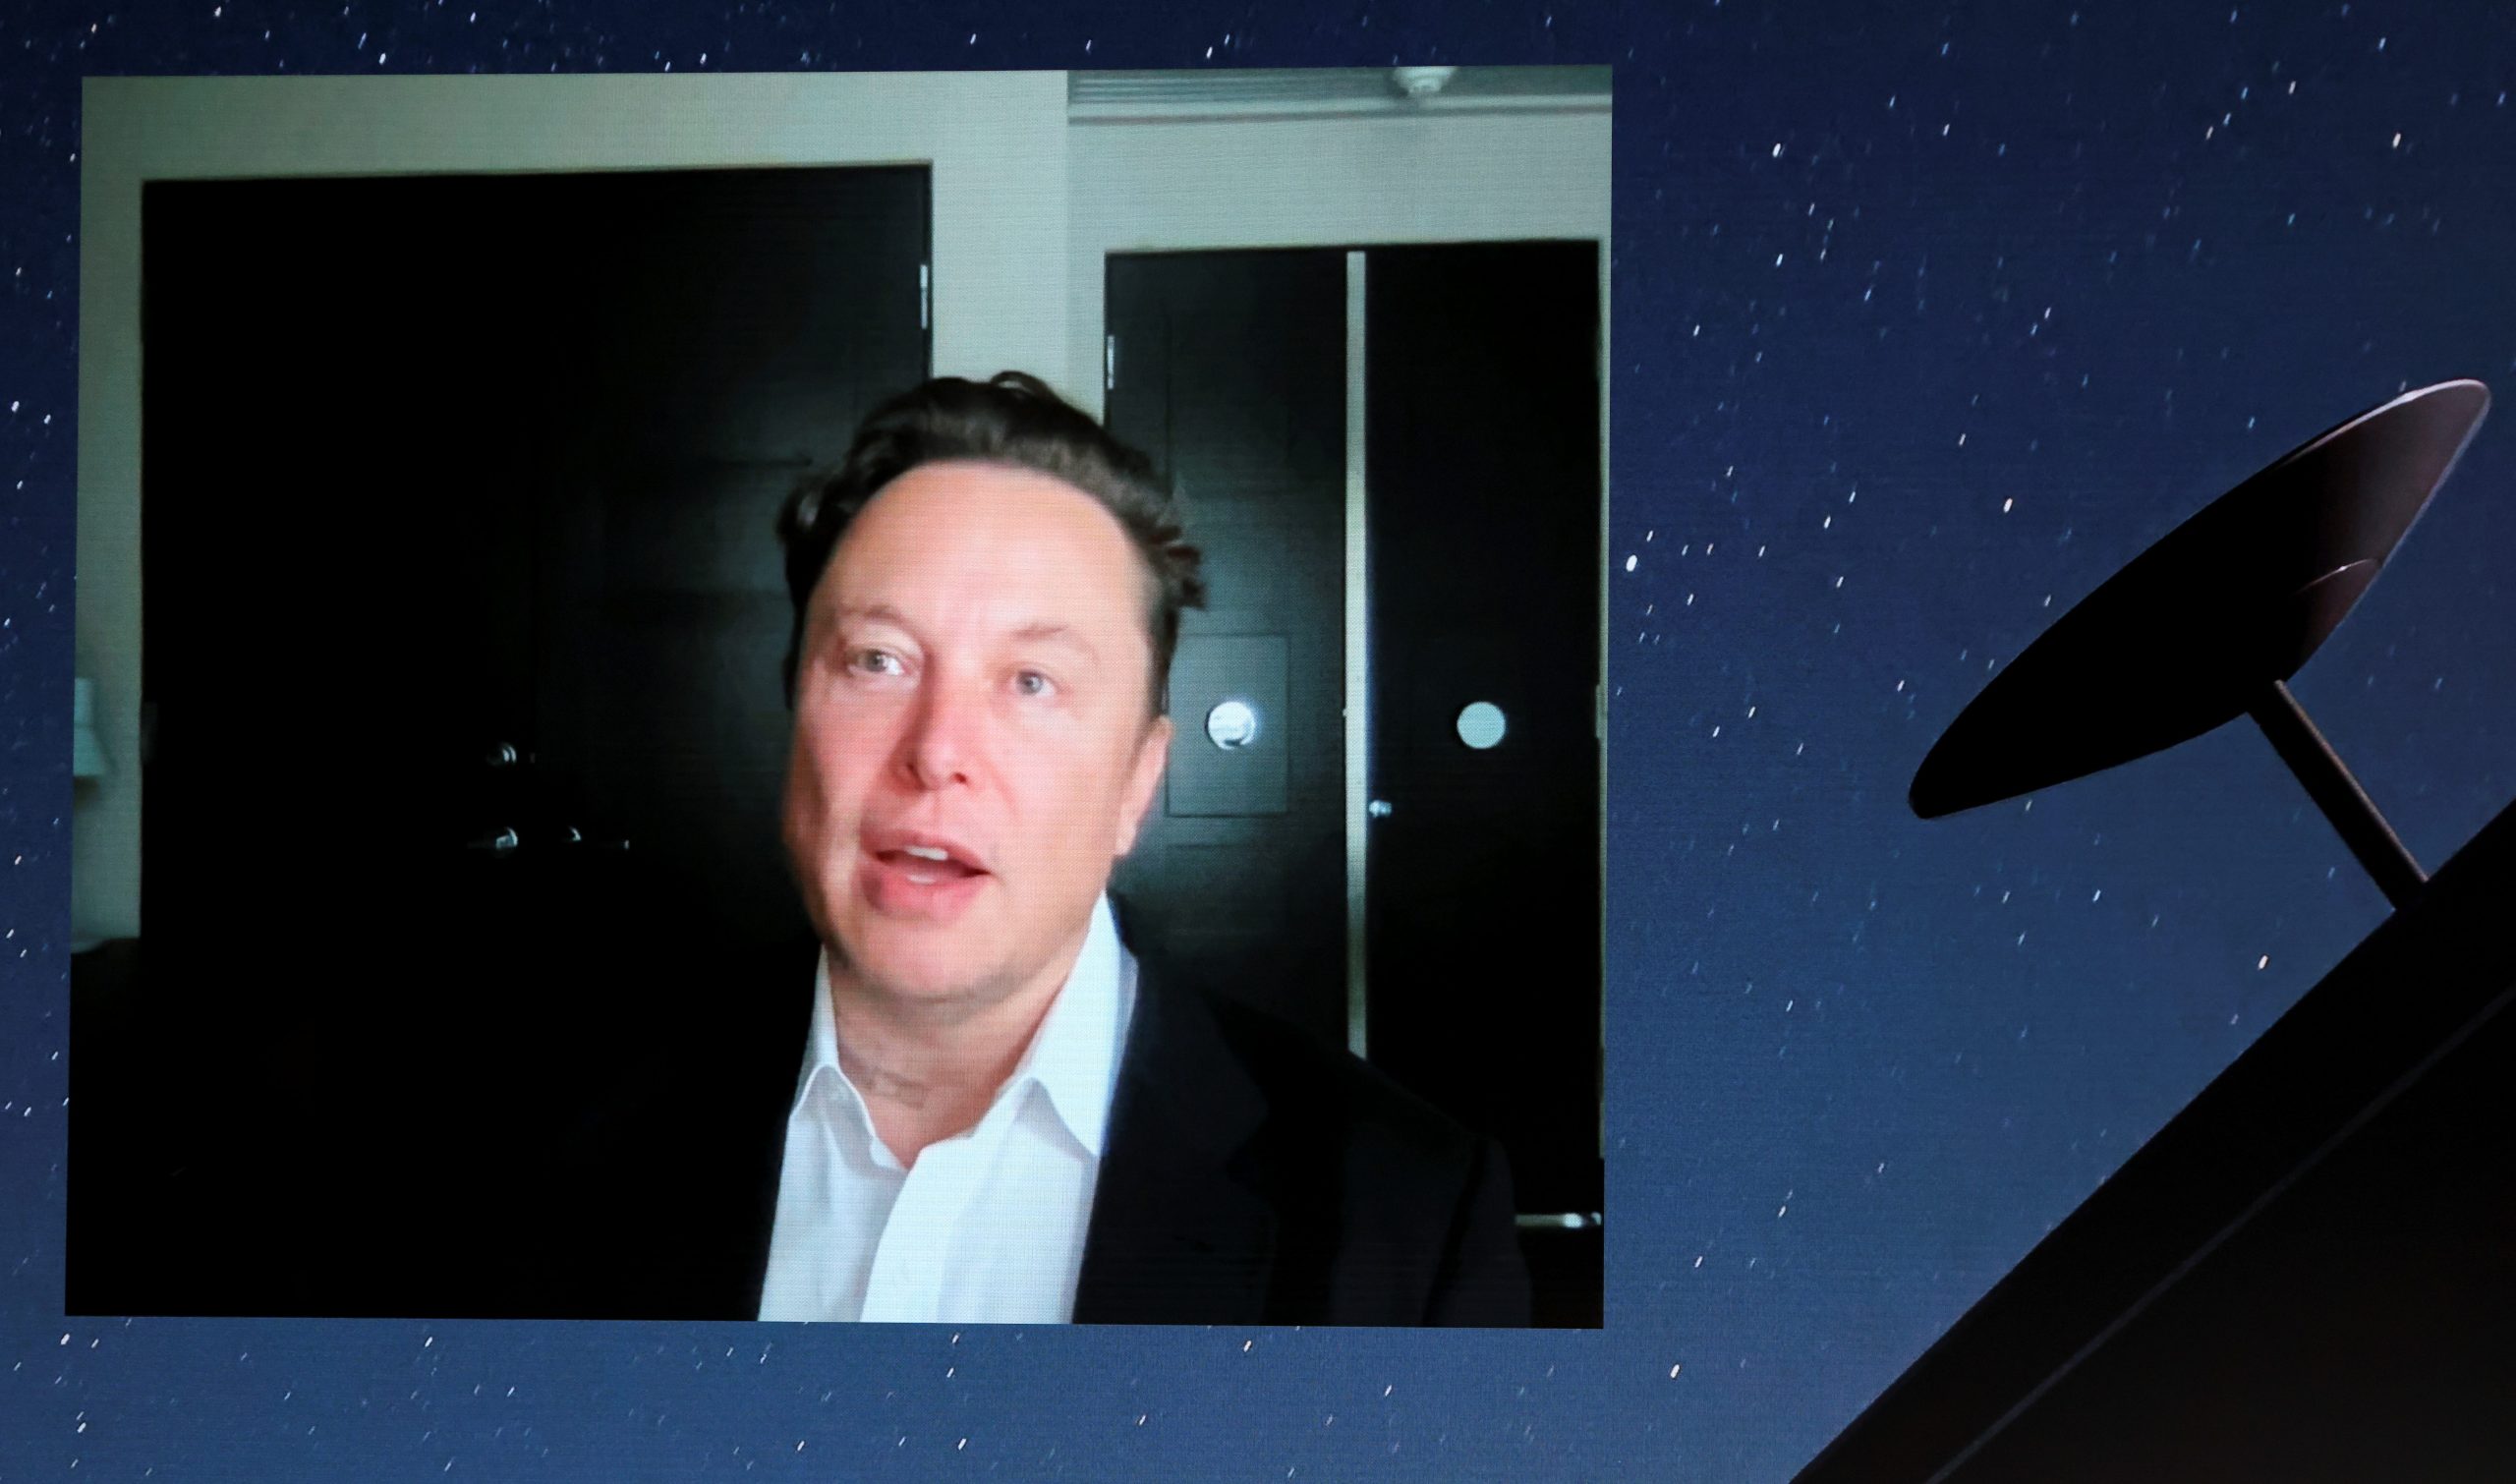 SpaceX founder Elon Musk speaking on a video call is projected onto a large screen.